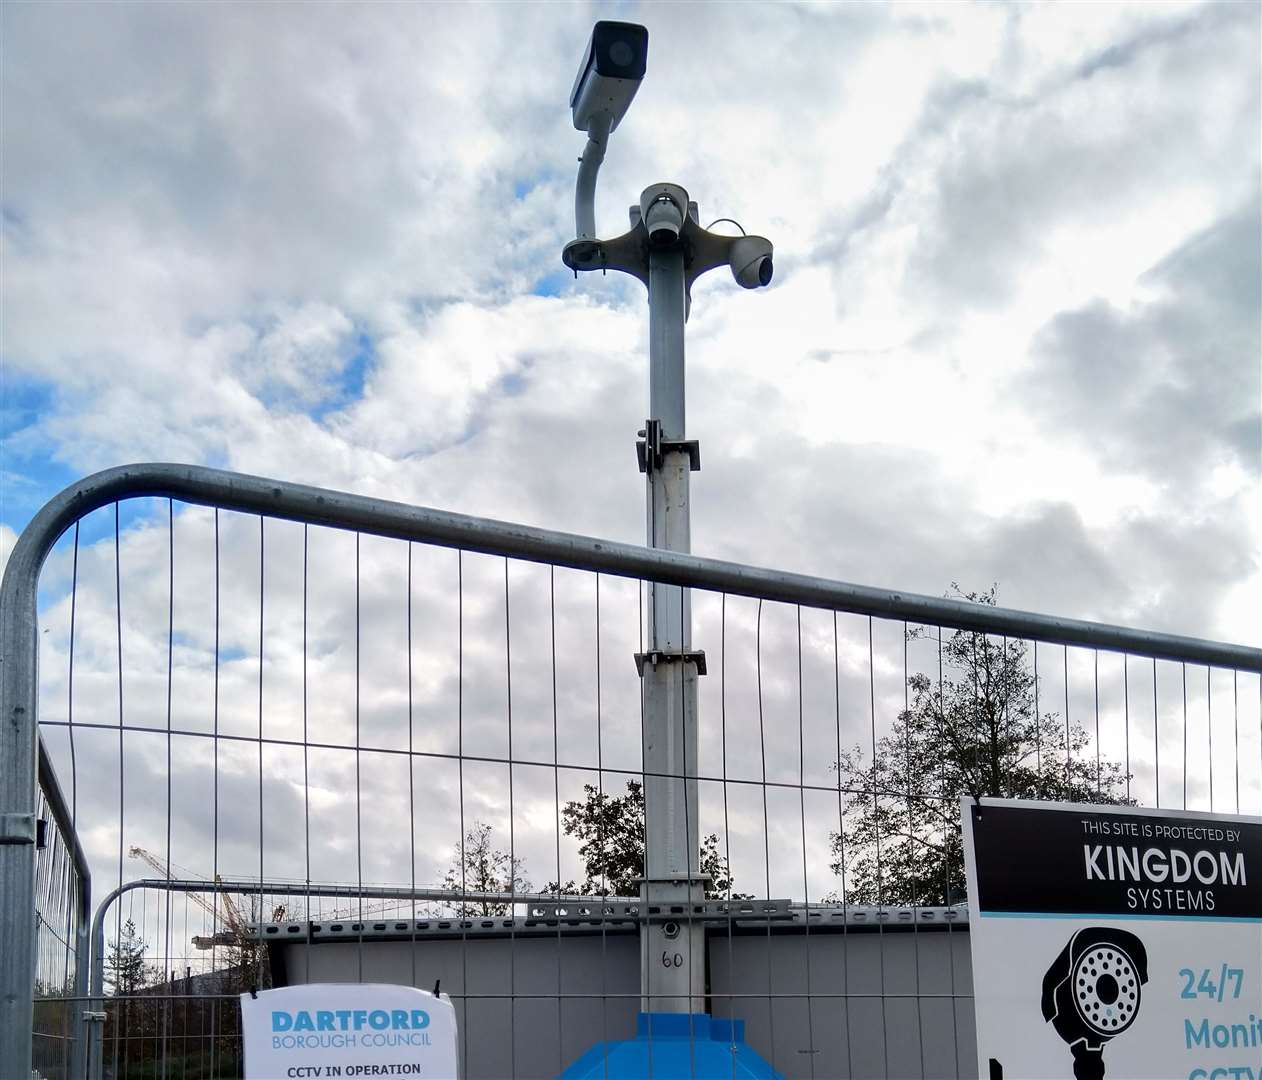 The camera is now back on Crossways Boulevard. Photo credit: Dartford council